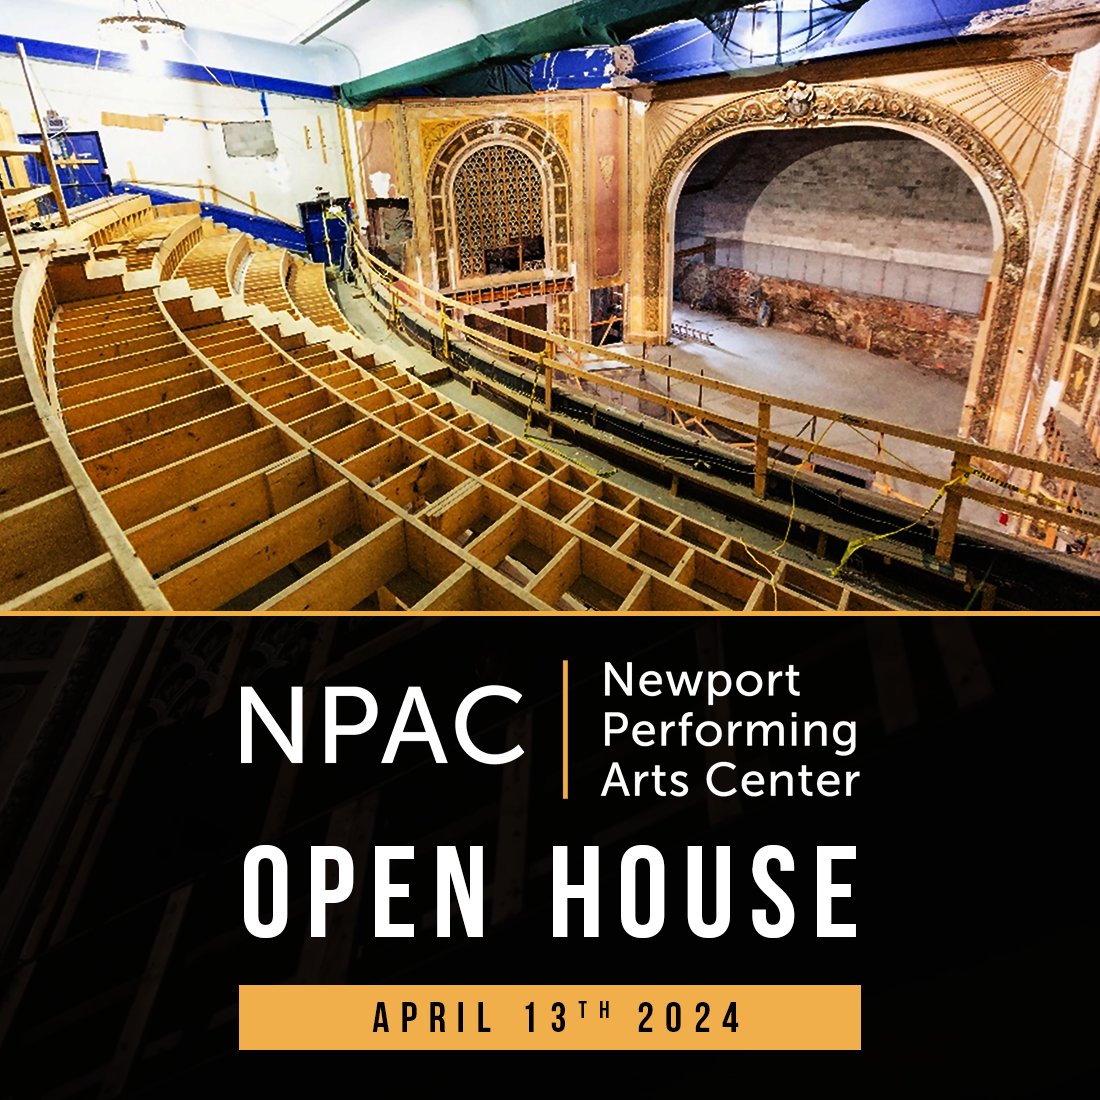 Our next Open House is scheduled for this Saturday! The theater will be open for viewing on April 13, 2024 from 10:00 am - 12:00 pm. 🚪 No RSVP is needed - come on in! #rhodeisland #newportri